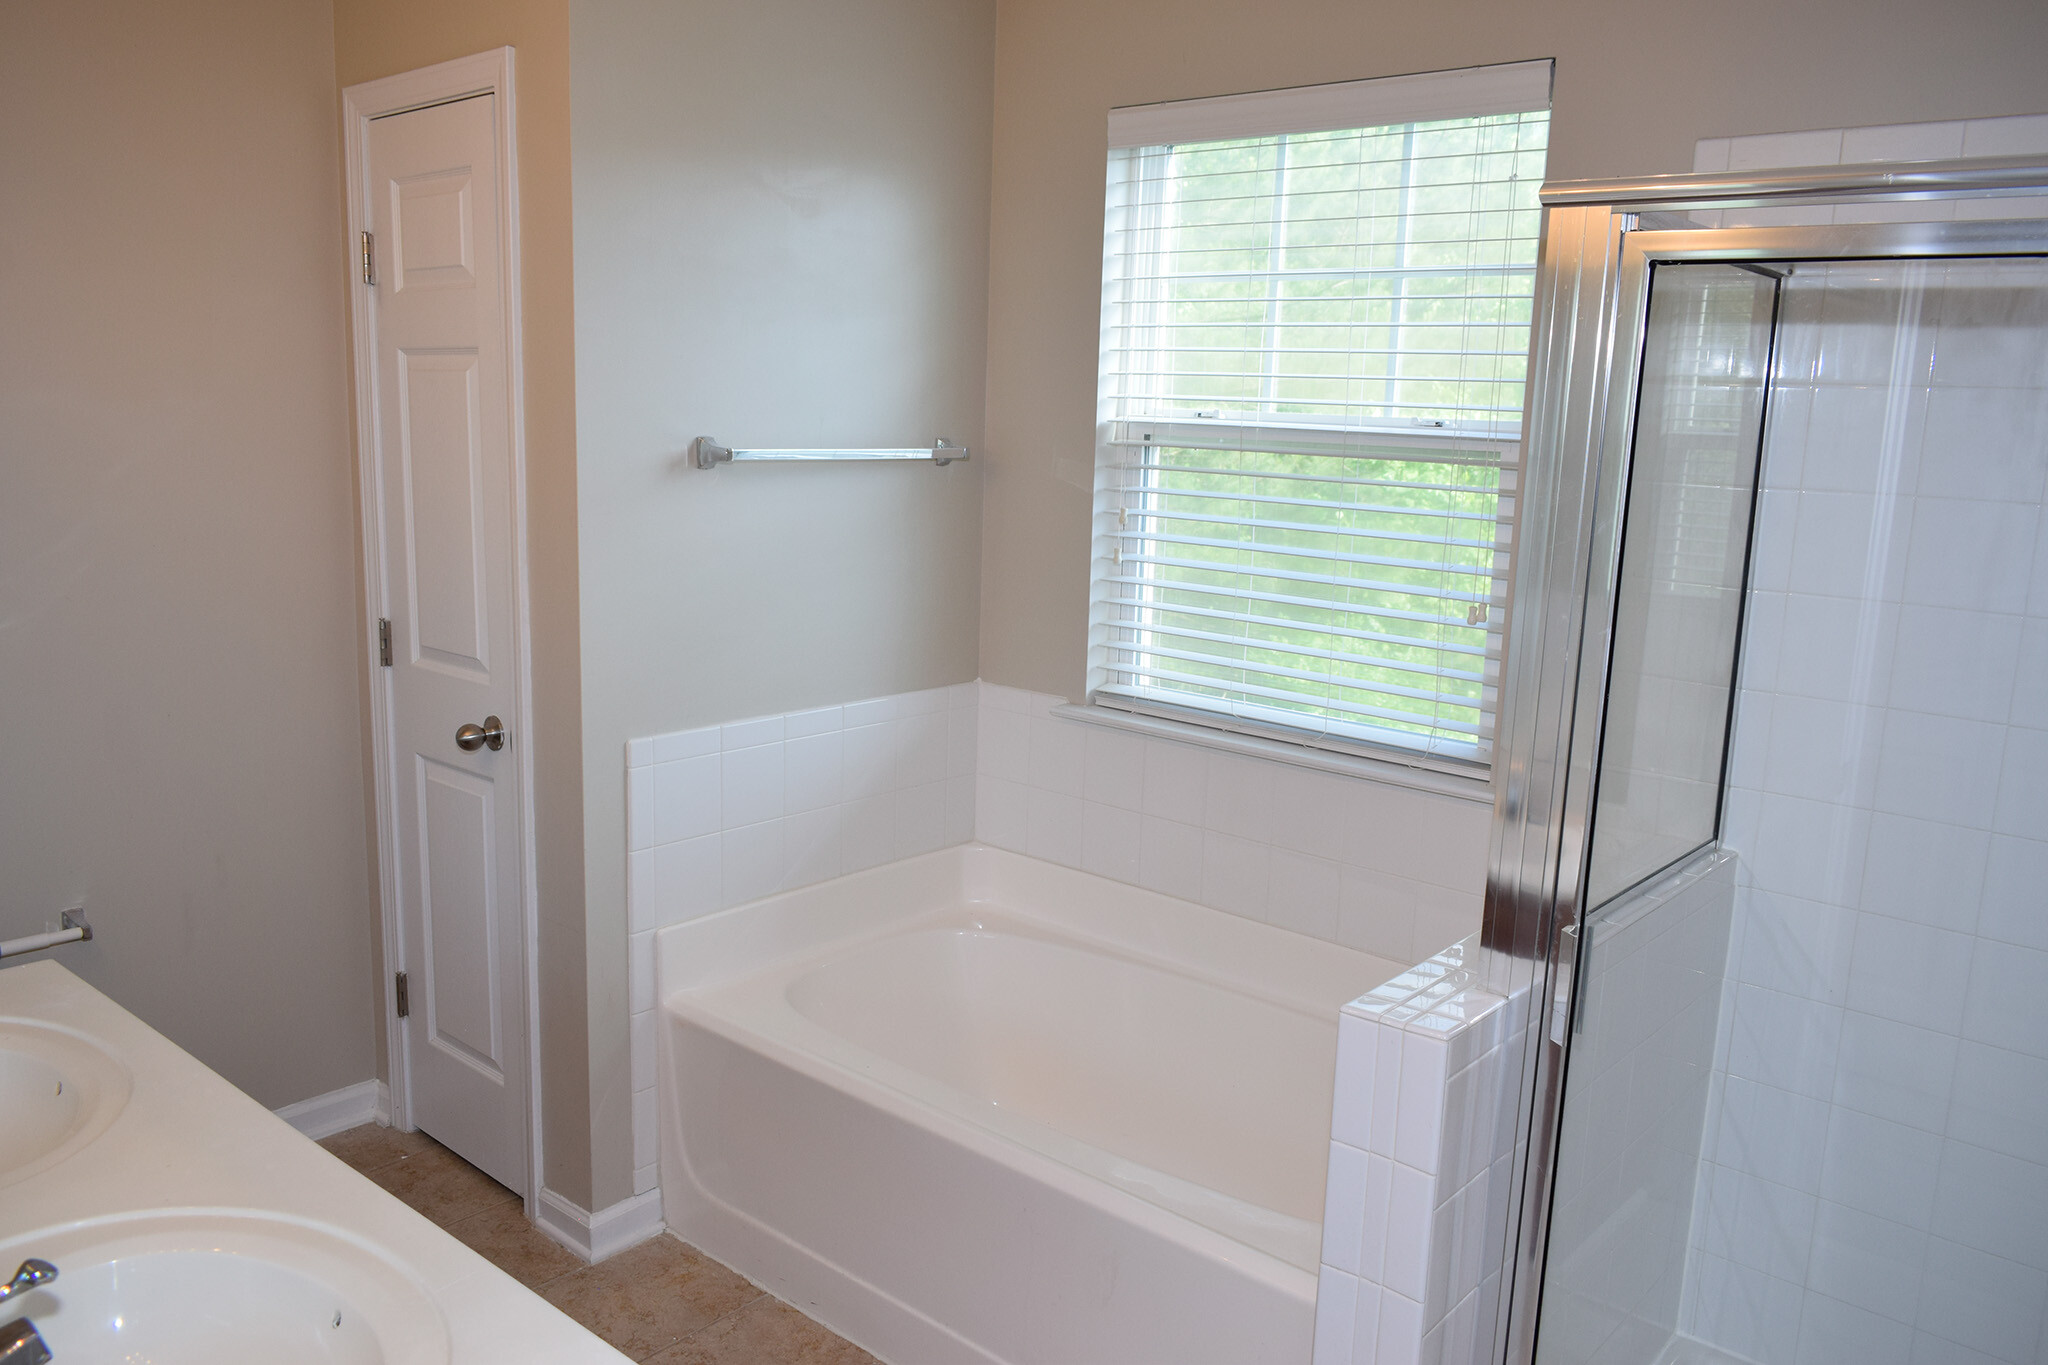 Large garden tub and linen closet in the master bath